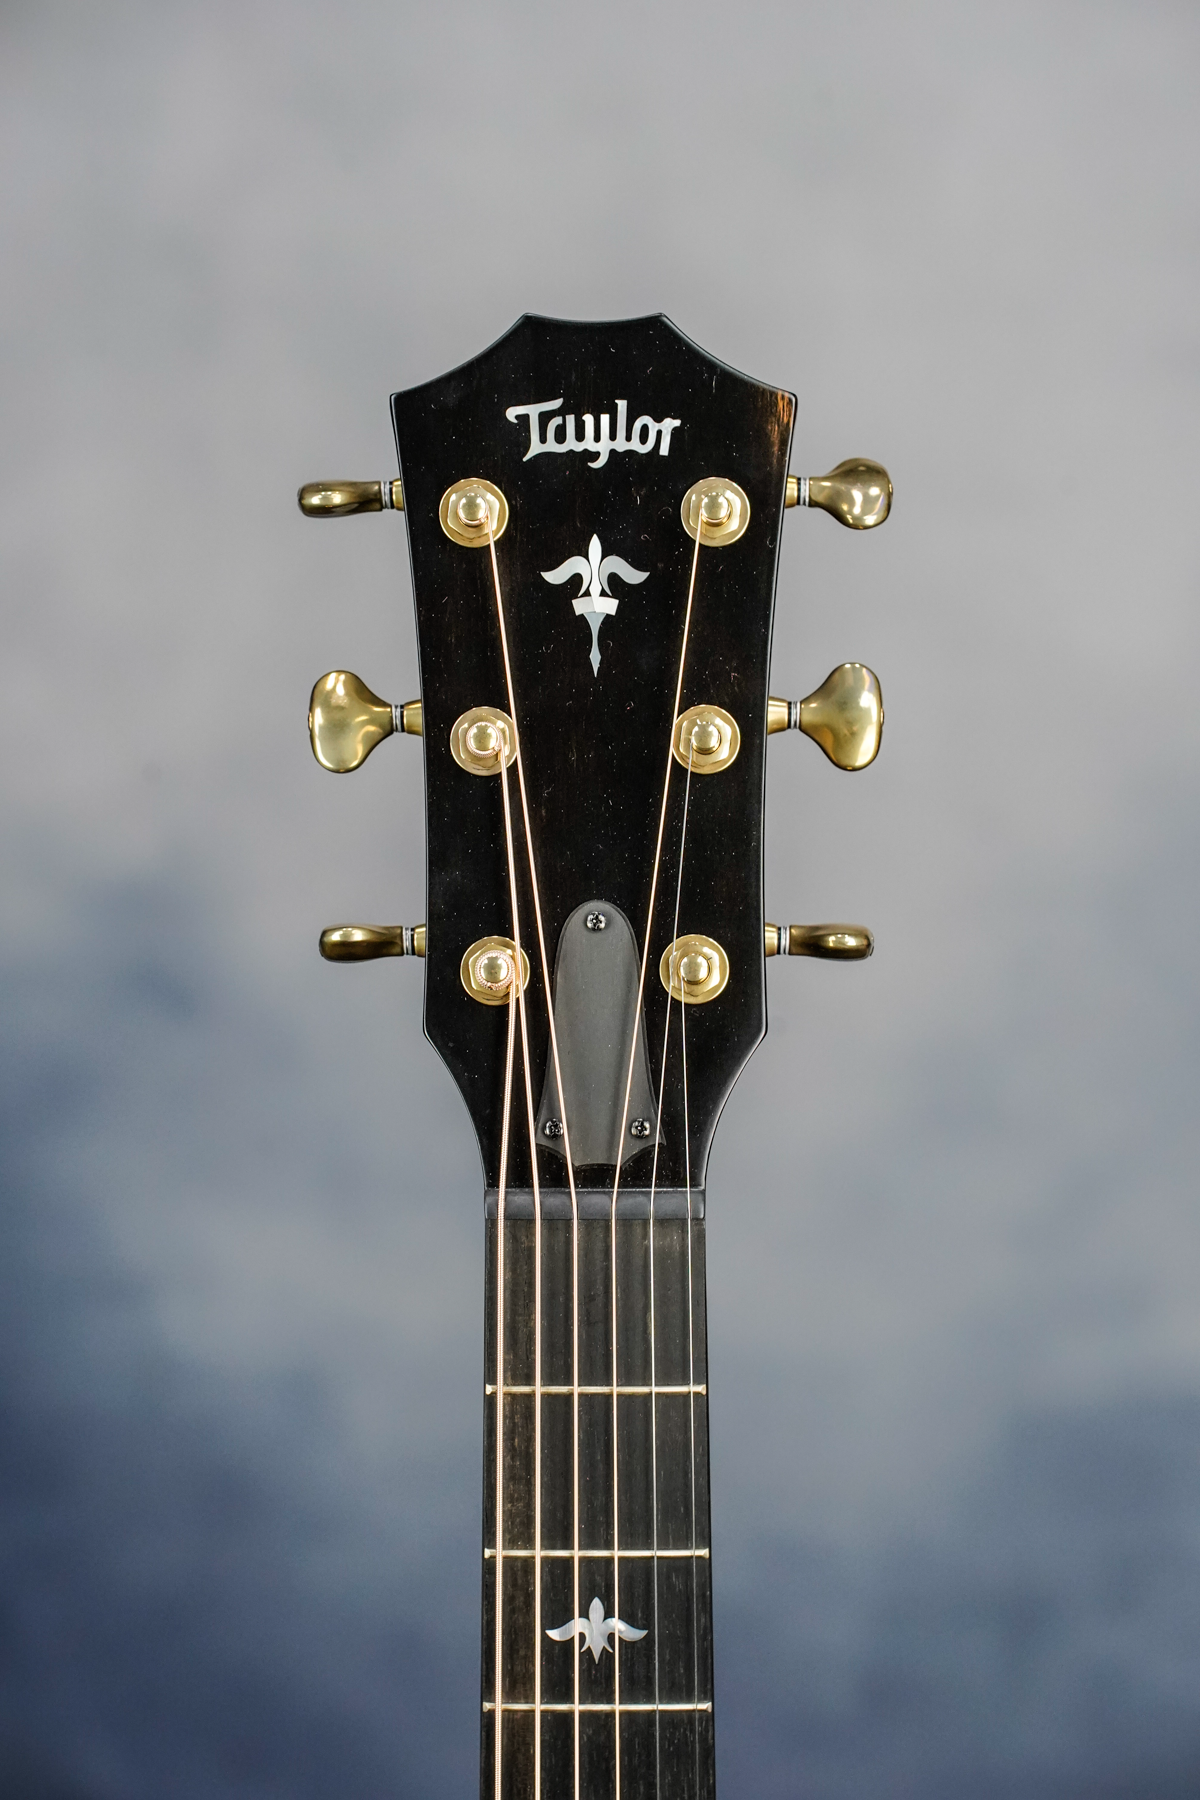 614ce Builders Edition Acoustic Guitar, Natural Top